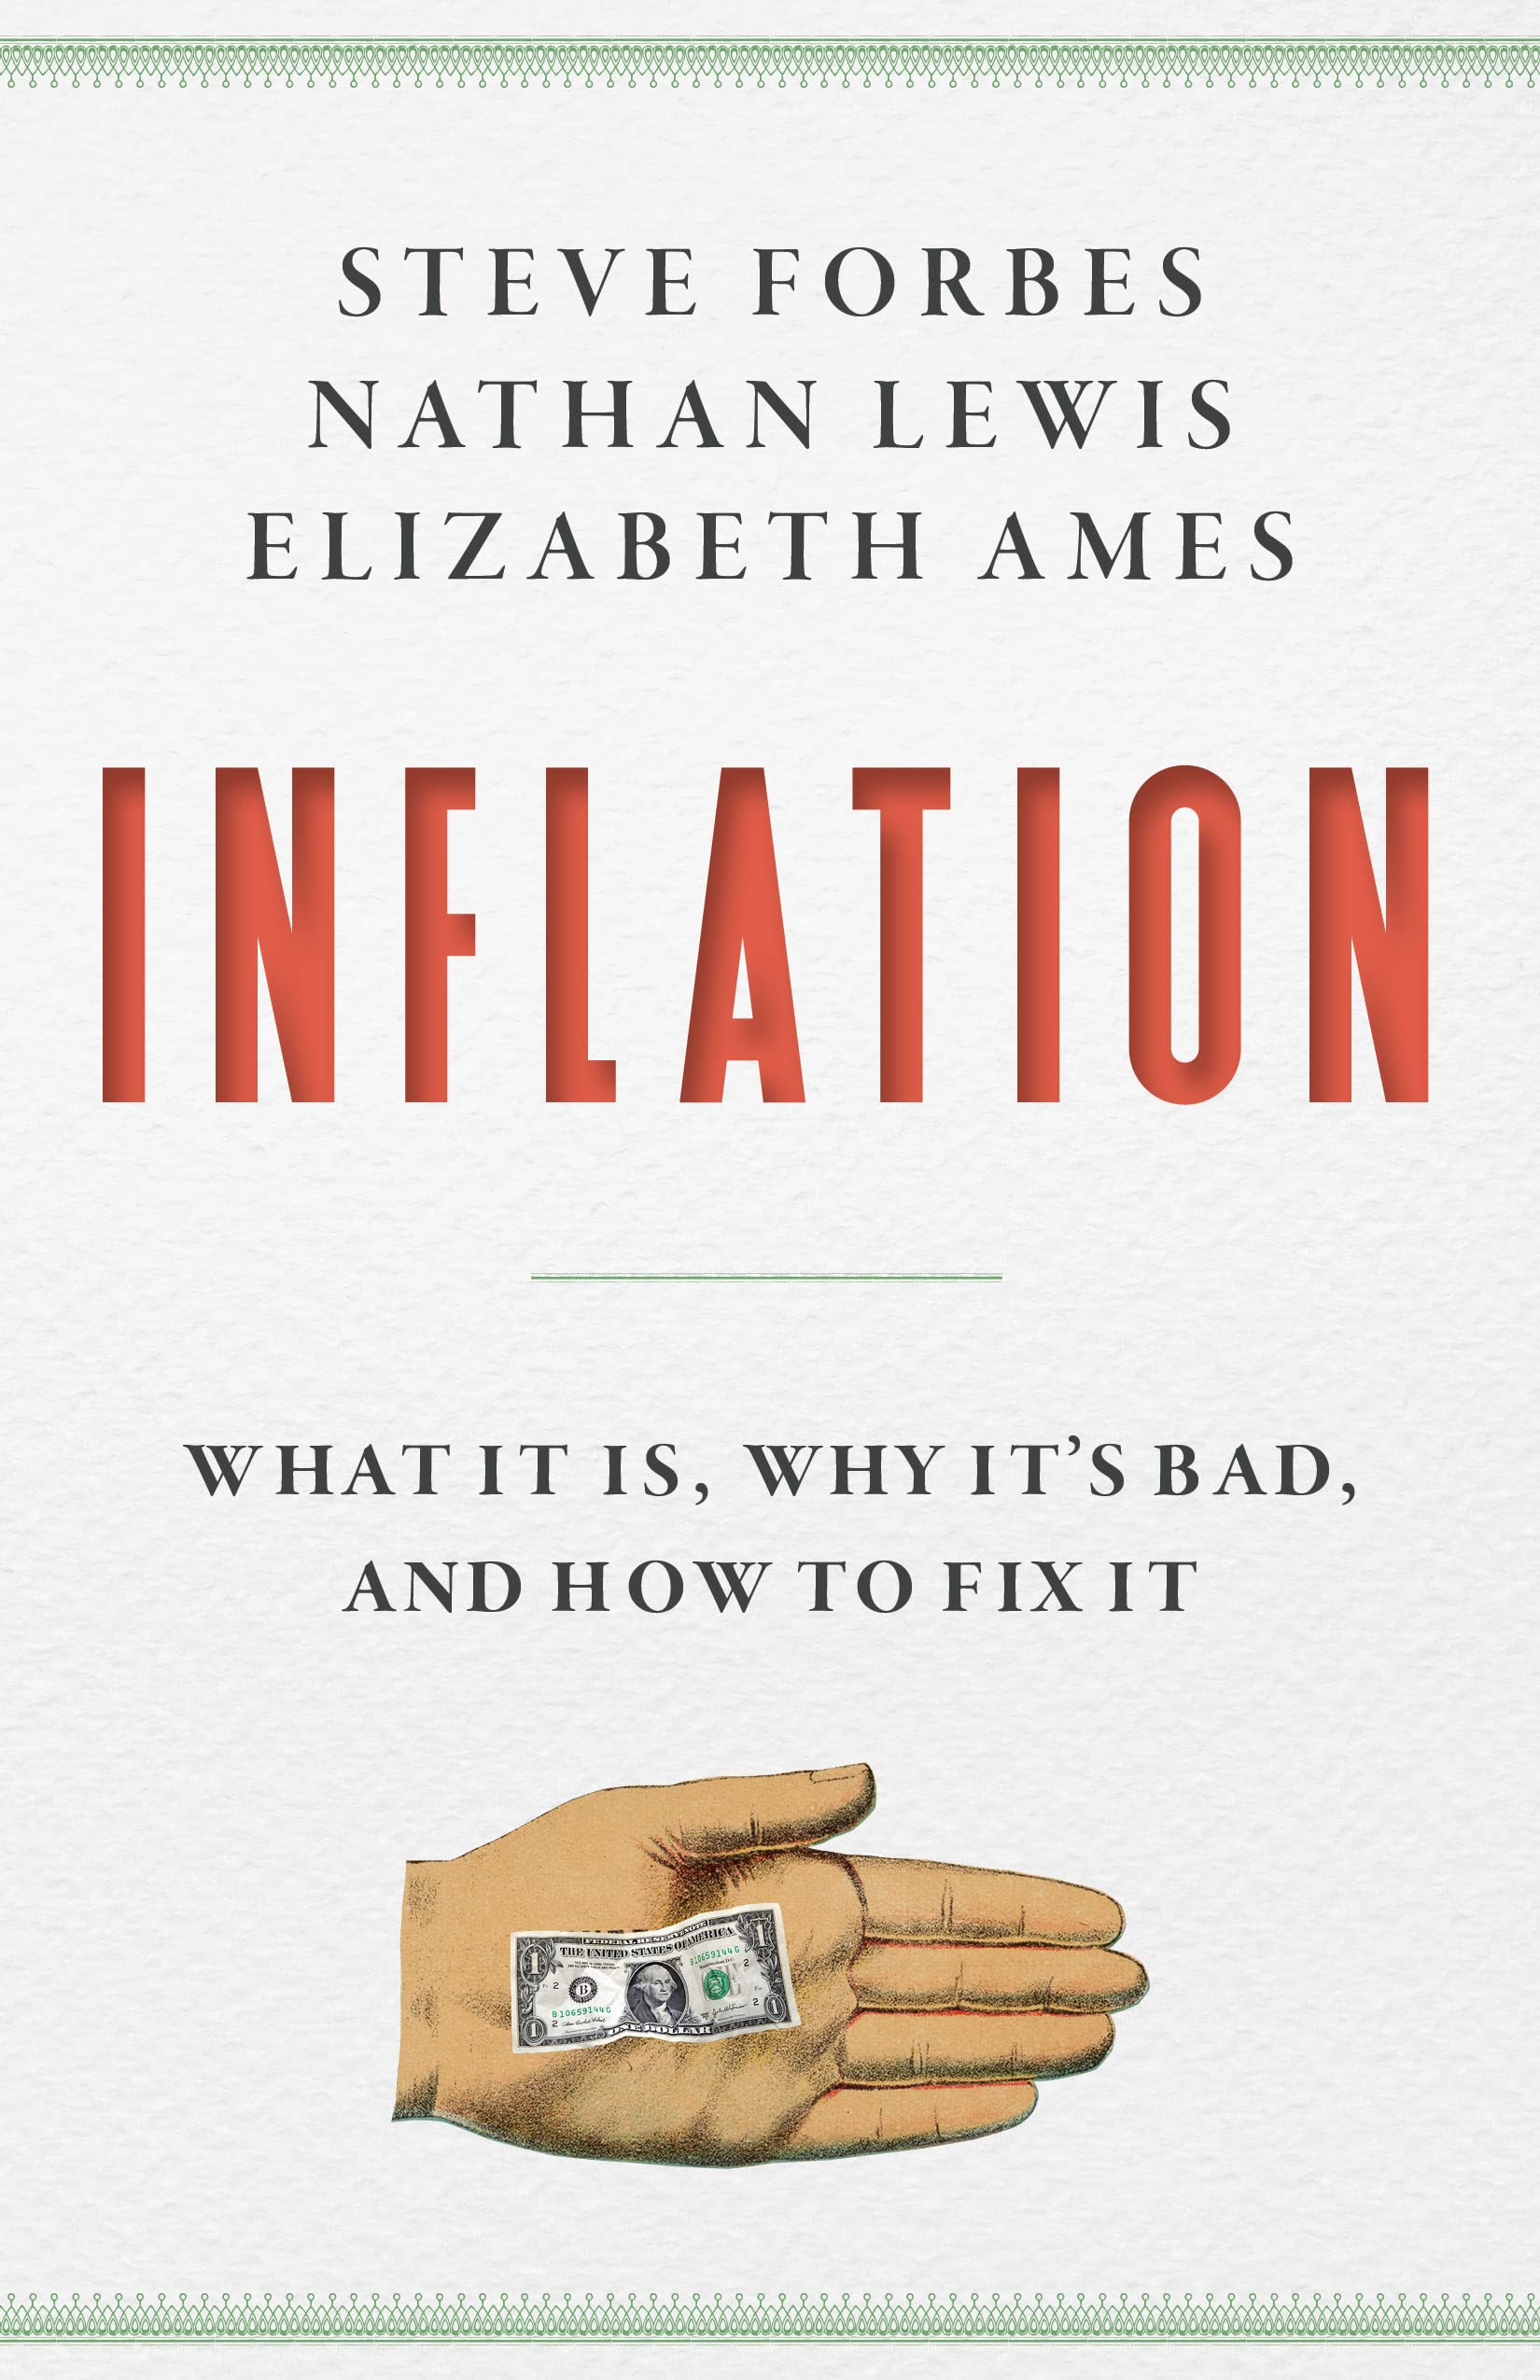 INFLATION with Steve Forbes